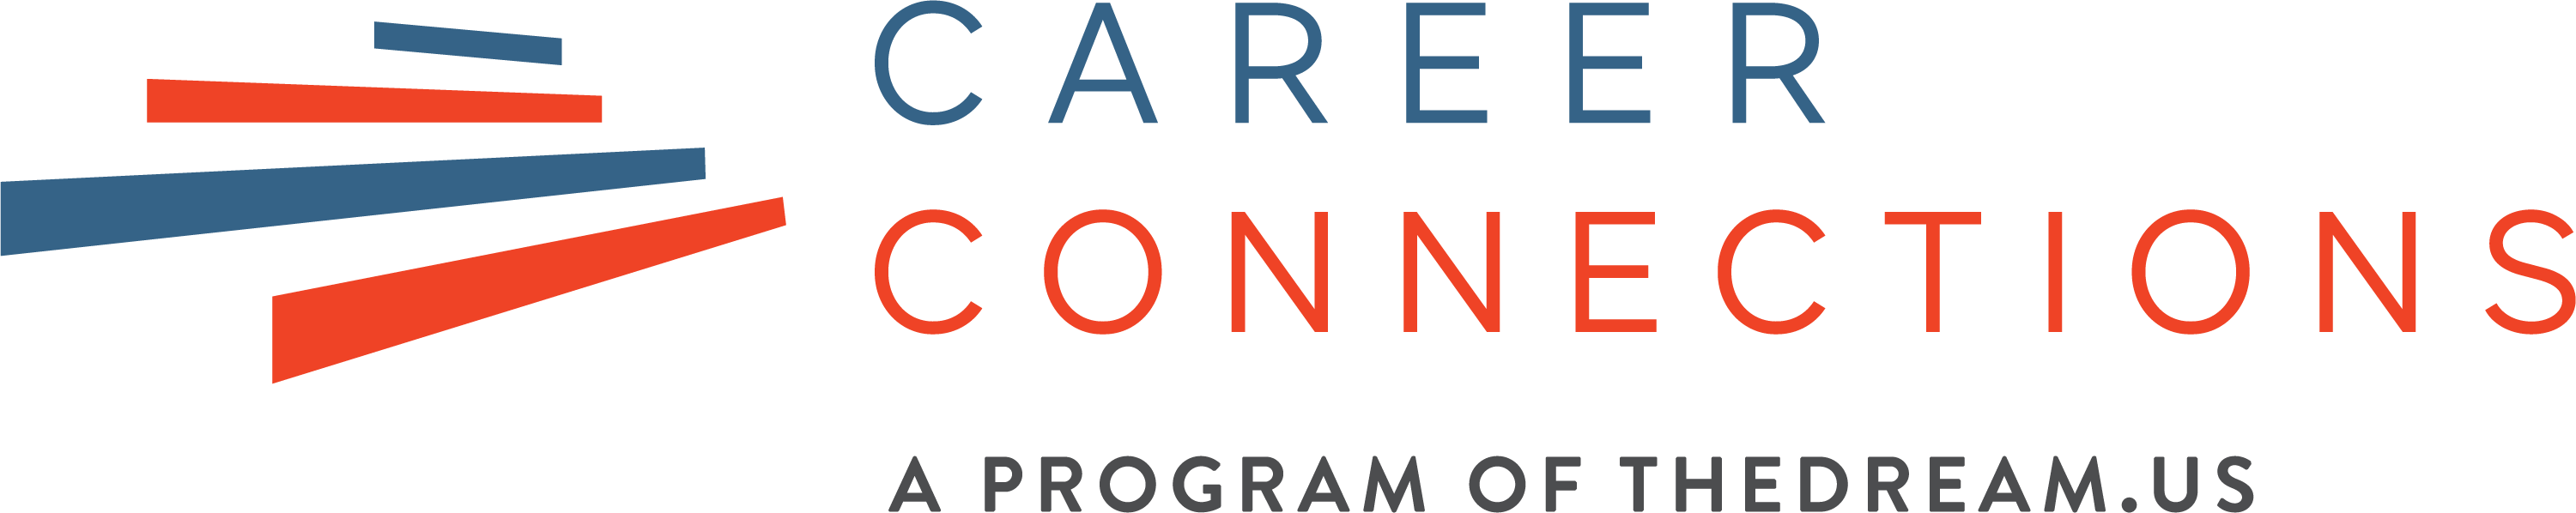 TheDream.US Career Connections Logo